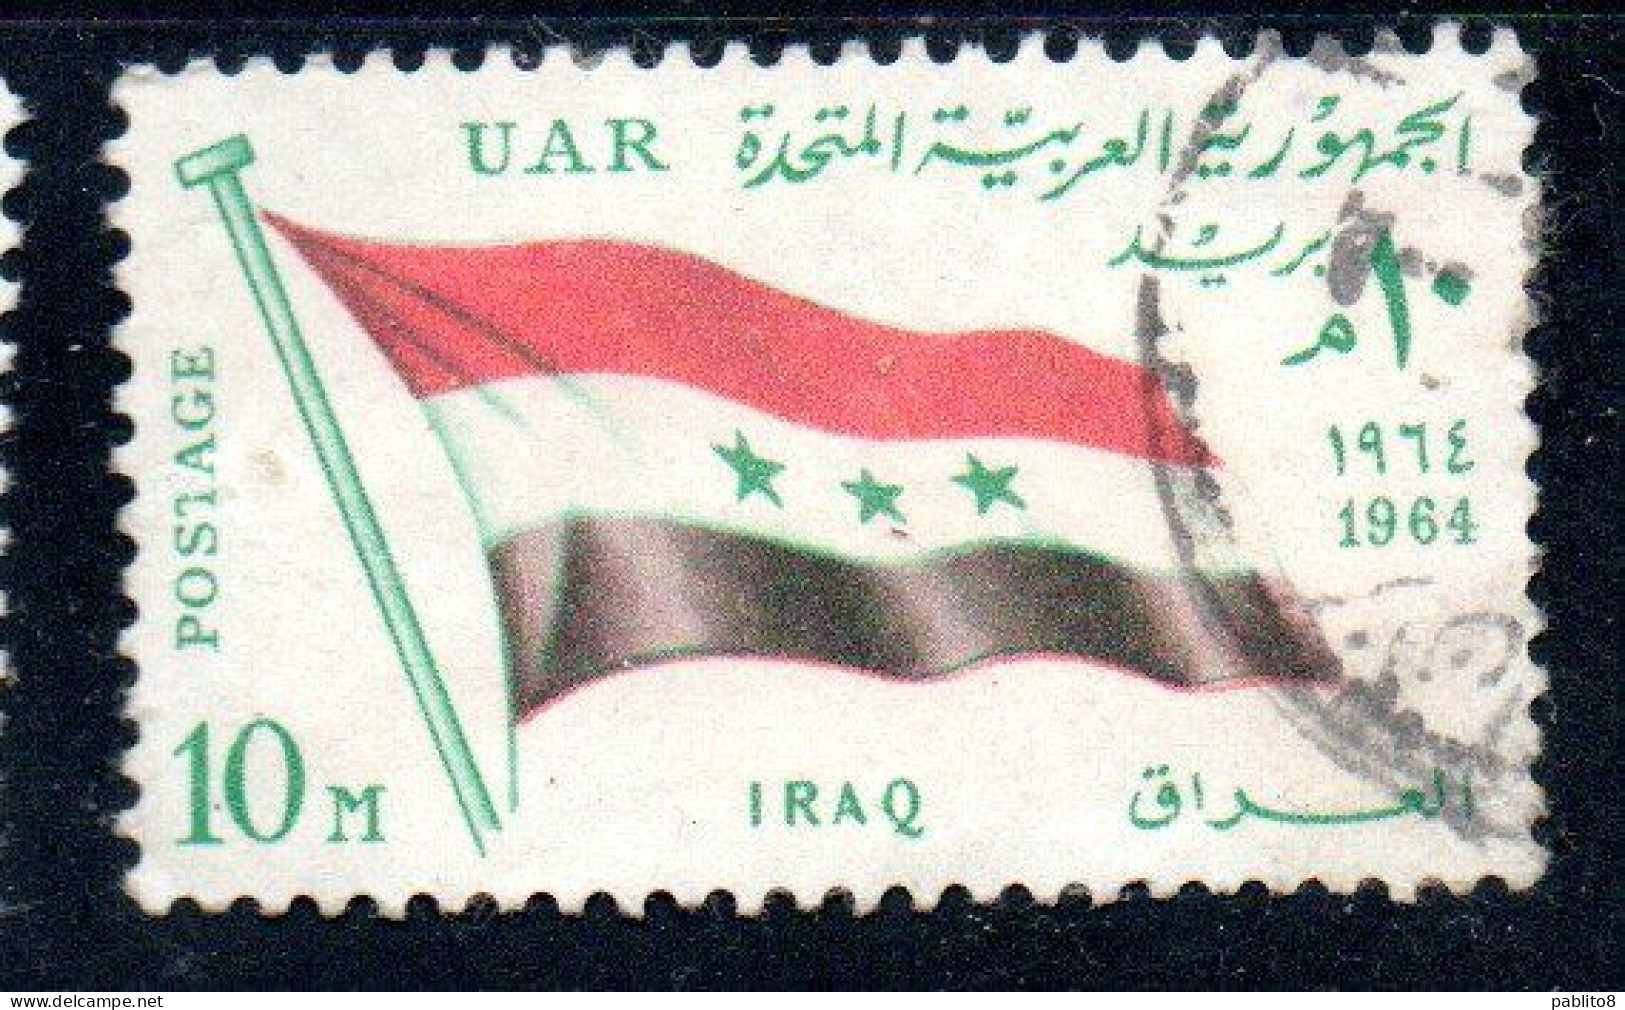 UAR EGYPT EGITTO 1964 SECOND MEETING OF HEADS STATE ARAB LEAGUE FLAG OF IRAQ 10m USED USATO OBLITERE' - Used Stamps